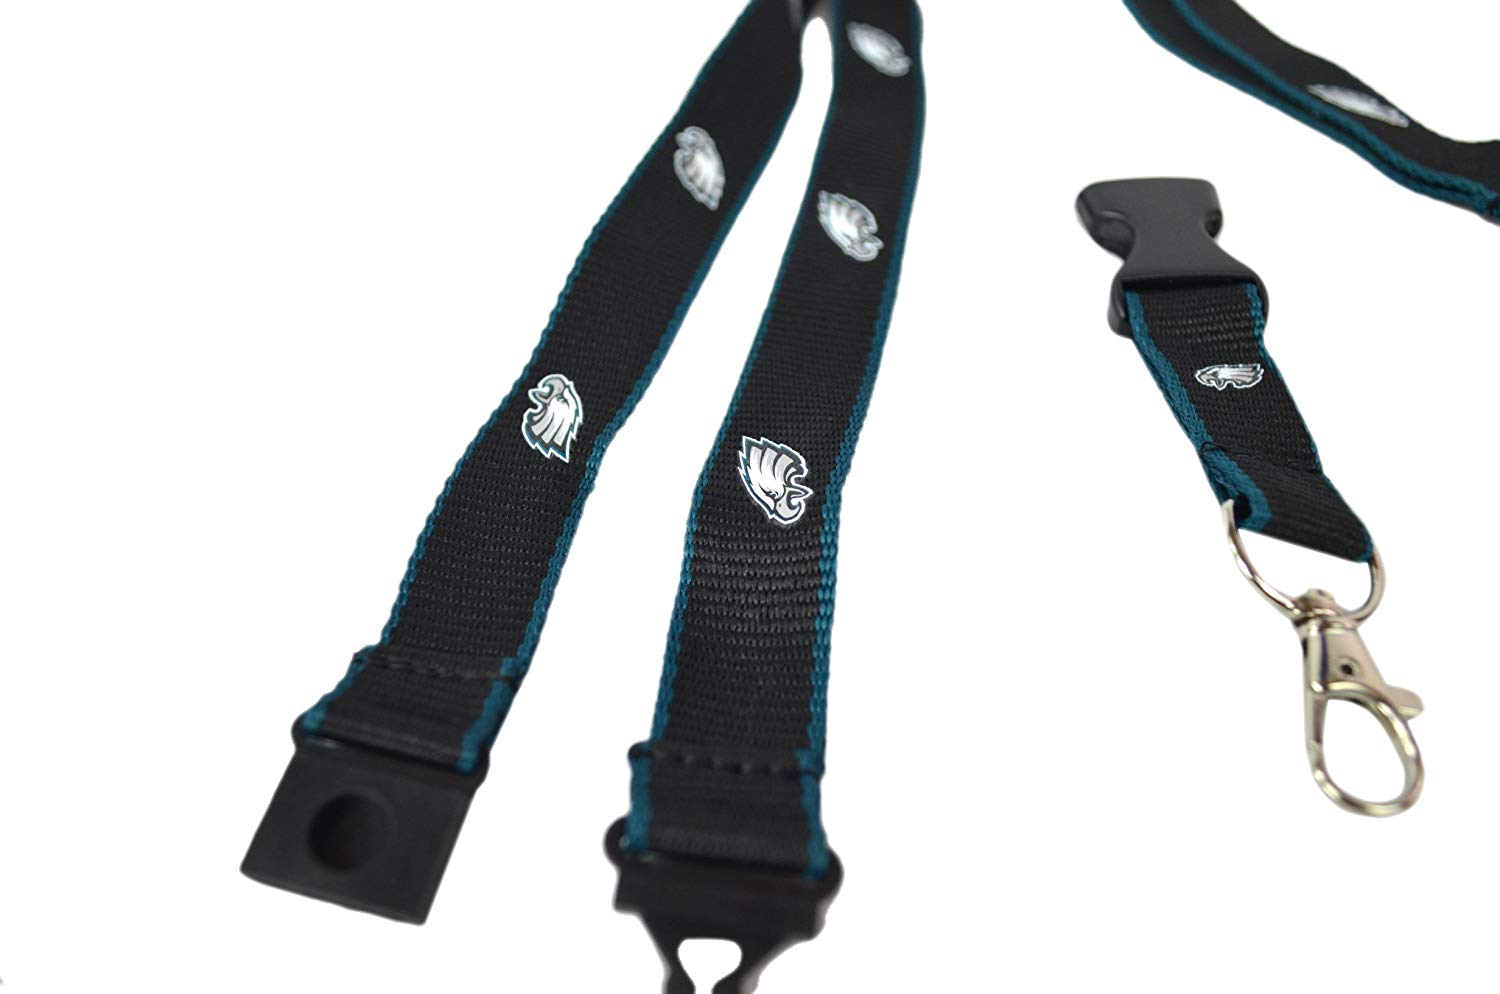 Official National Football League Fan Shop Authentic 2-pack NFL Lanyard/keychain Office Badge Holder